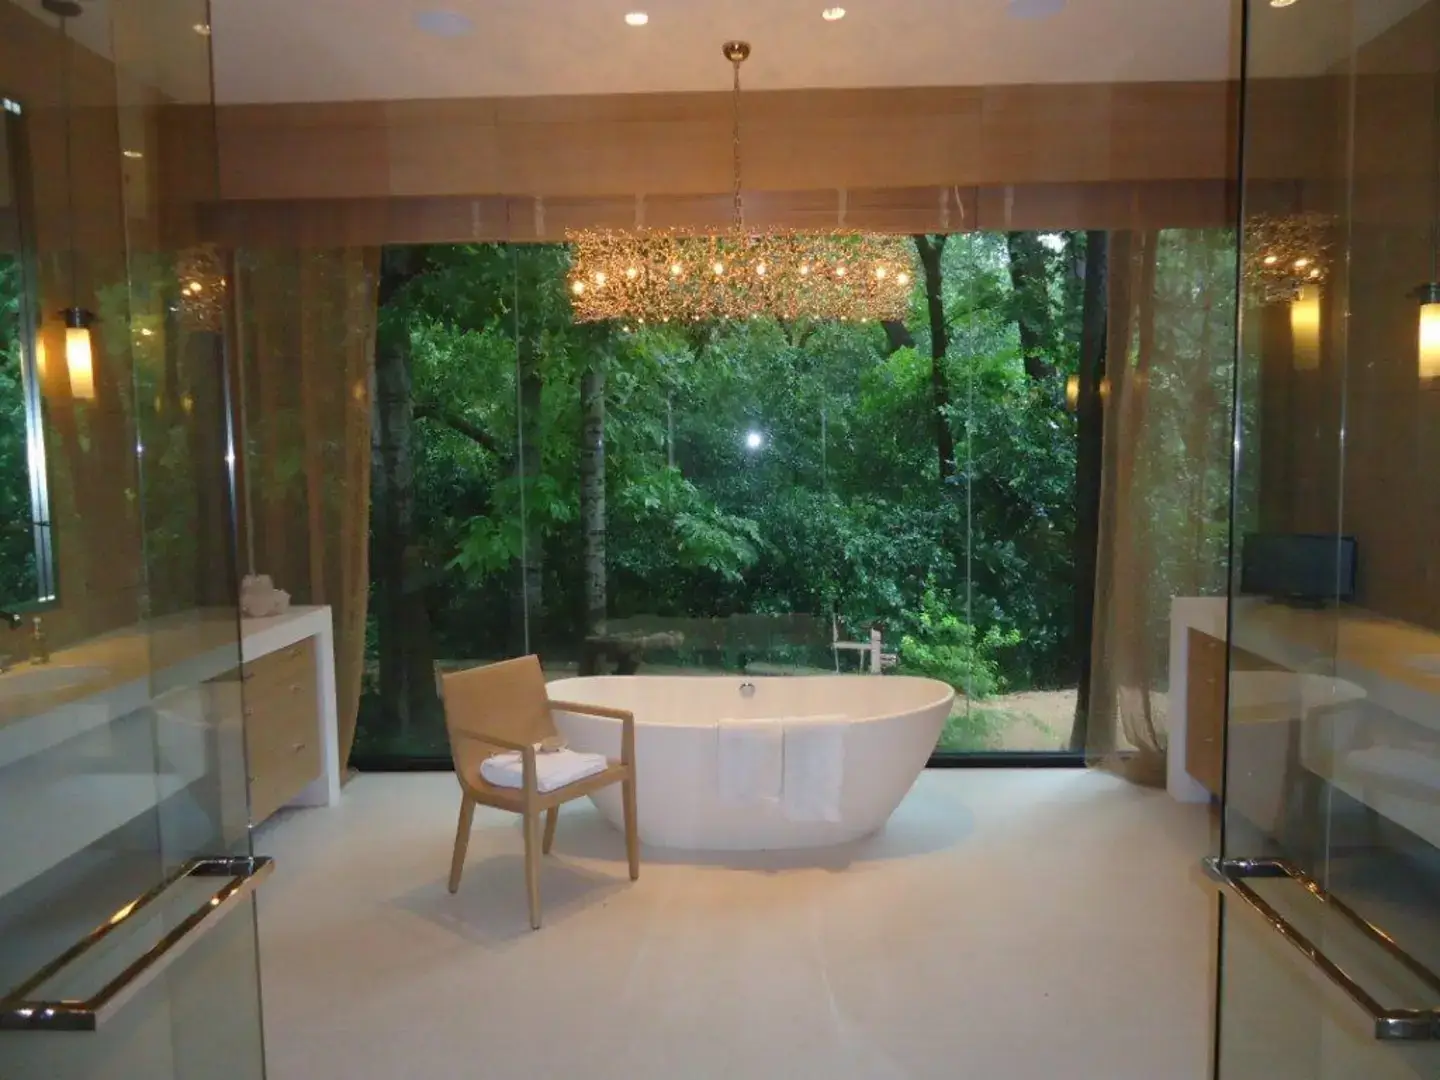 Bathroom with centered tub and floor-to-ceiling windows with drapery and wooden blinds.